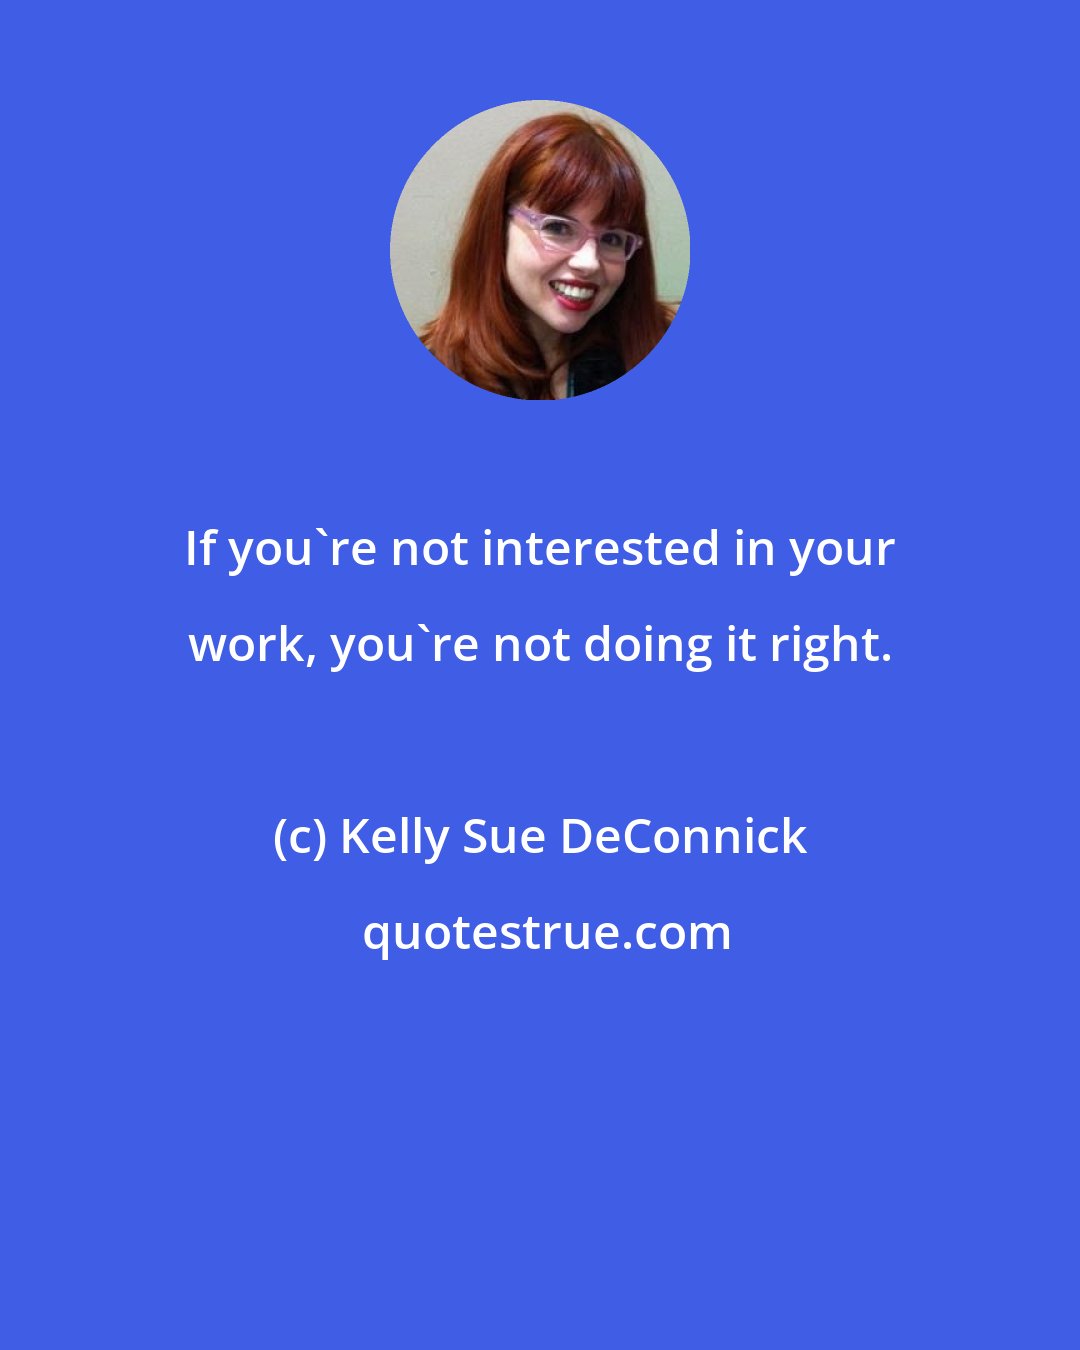 Kelly Sue DeConnick: If you're not interested in your work, you're not doing it right.